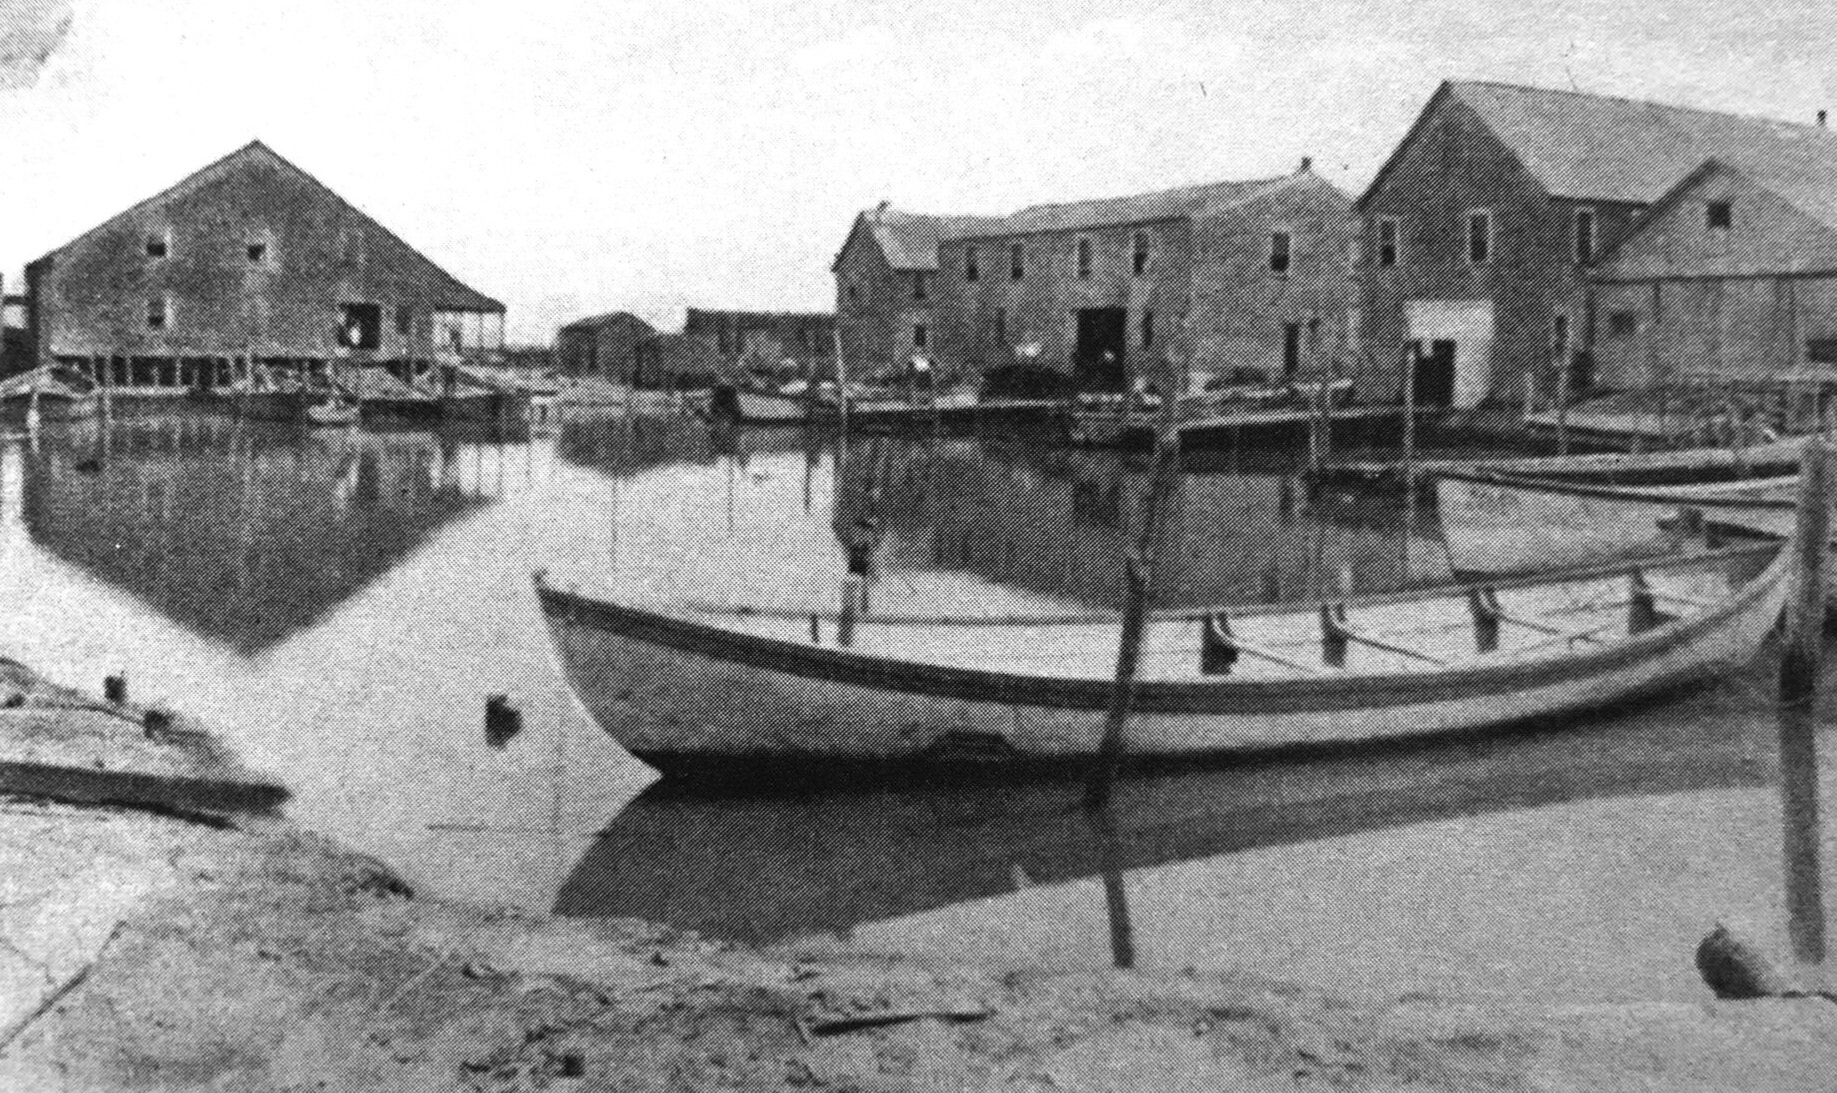 Courtesy of the Sea Isle City Historical Museum. Pound fishing houses and boats, early 1900s. 